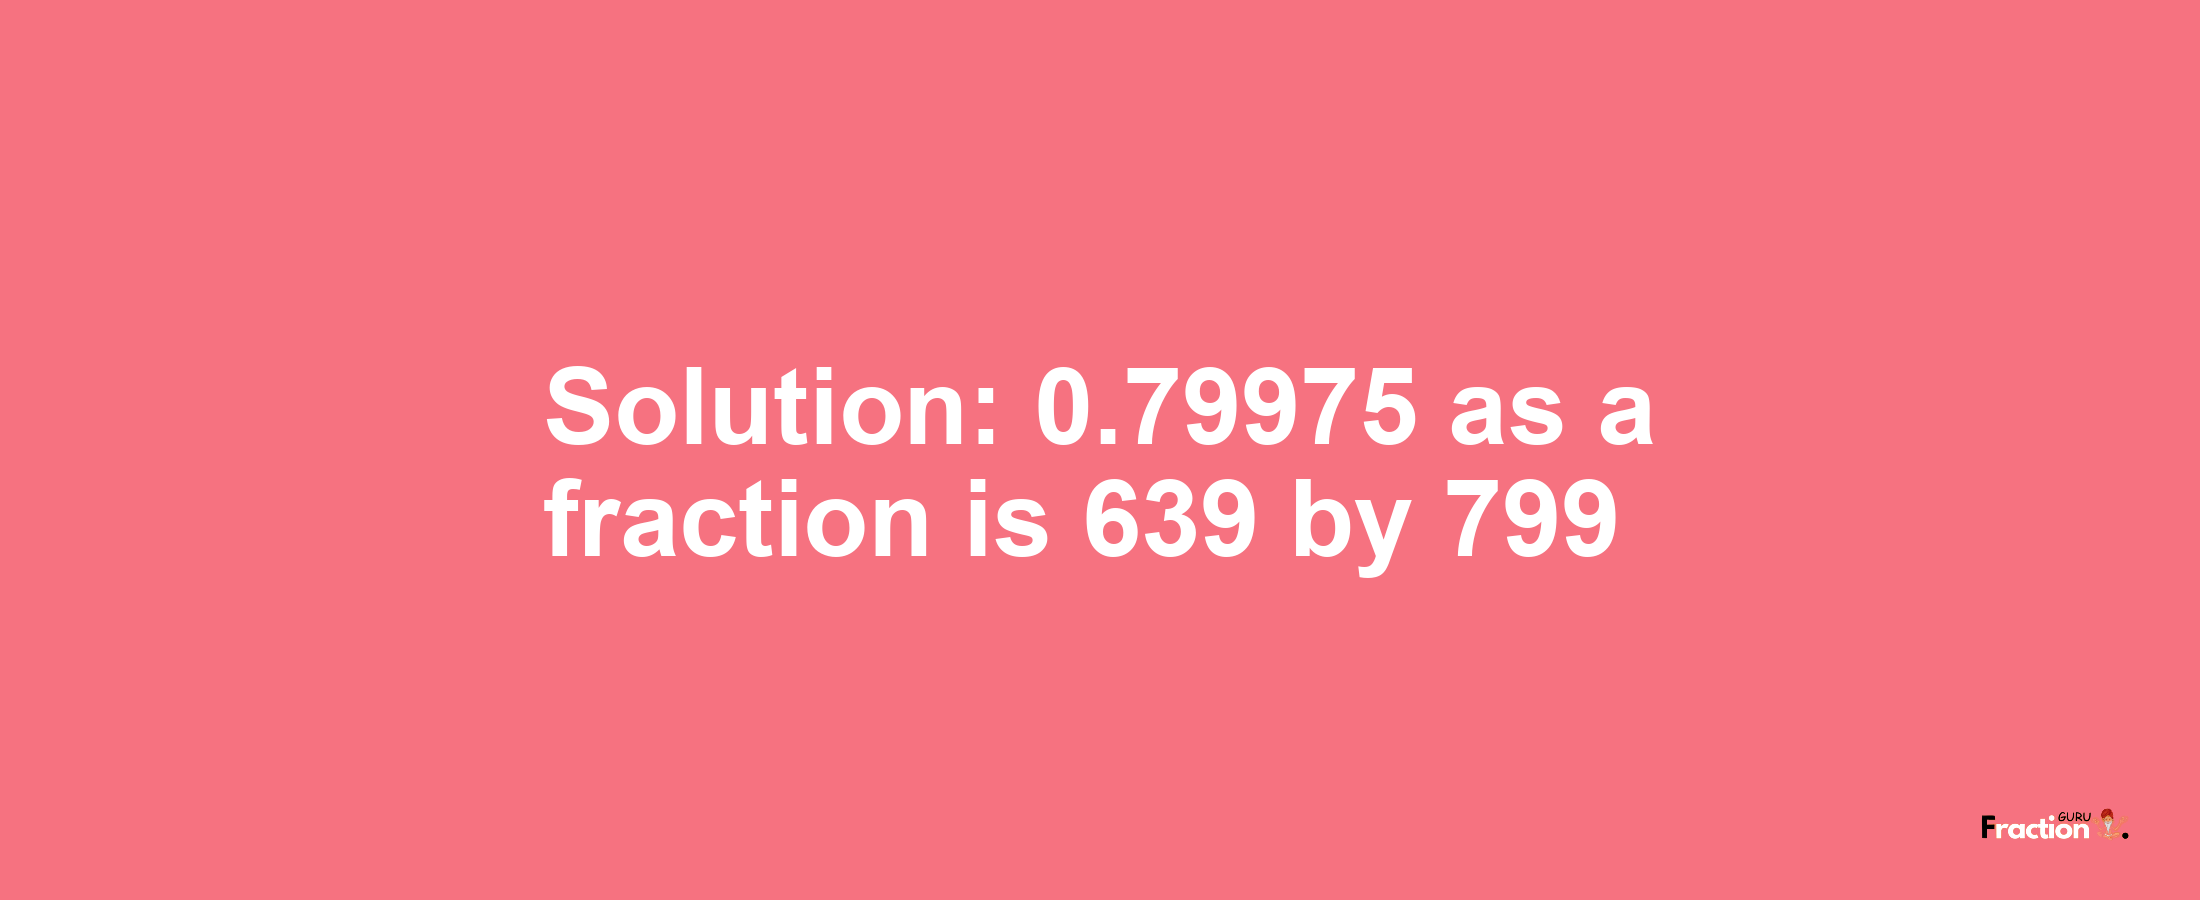 Solution:0.79975 as a fraction is 639/799